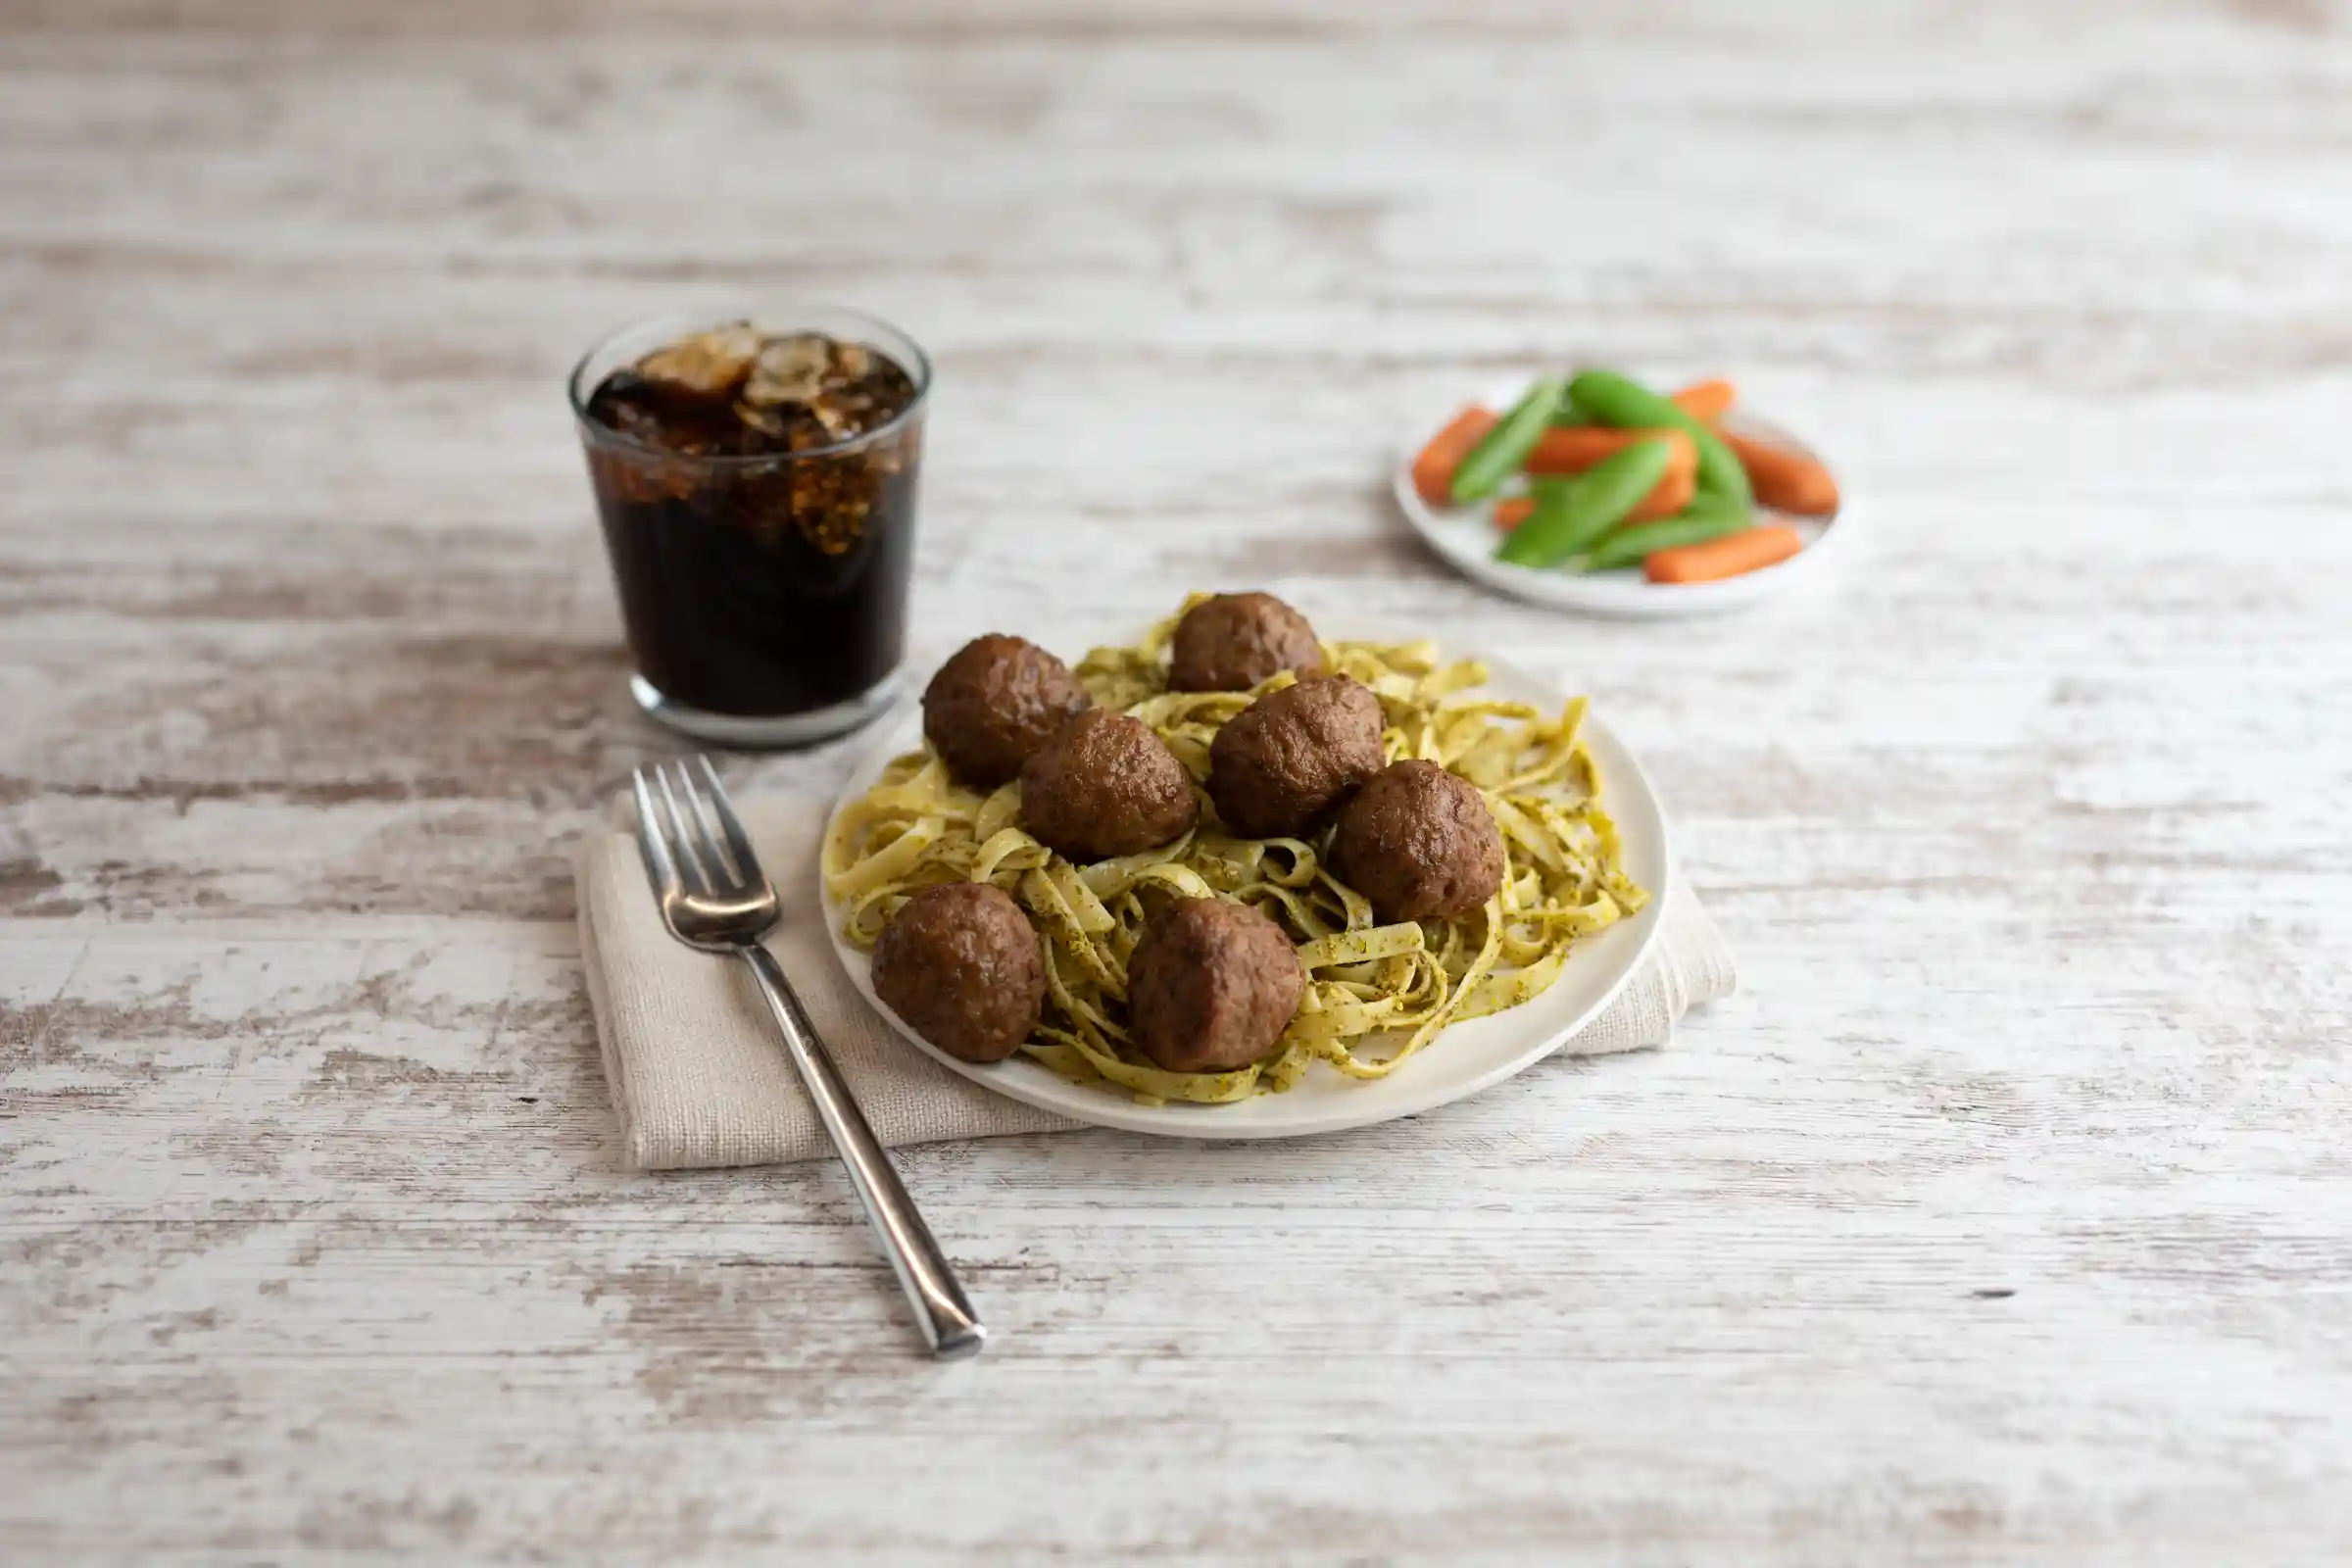 Tyson® Fully Cooked Oven Roasted Pork and Beef Italian Style Meatballs, .5 ozhttps://images.salsify.com/image/upload/s--o9RMKOXx--/q_25/lanxmxh9lczu3t3739u0.webp